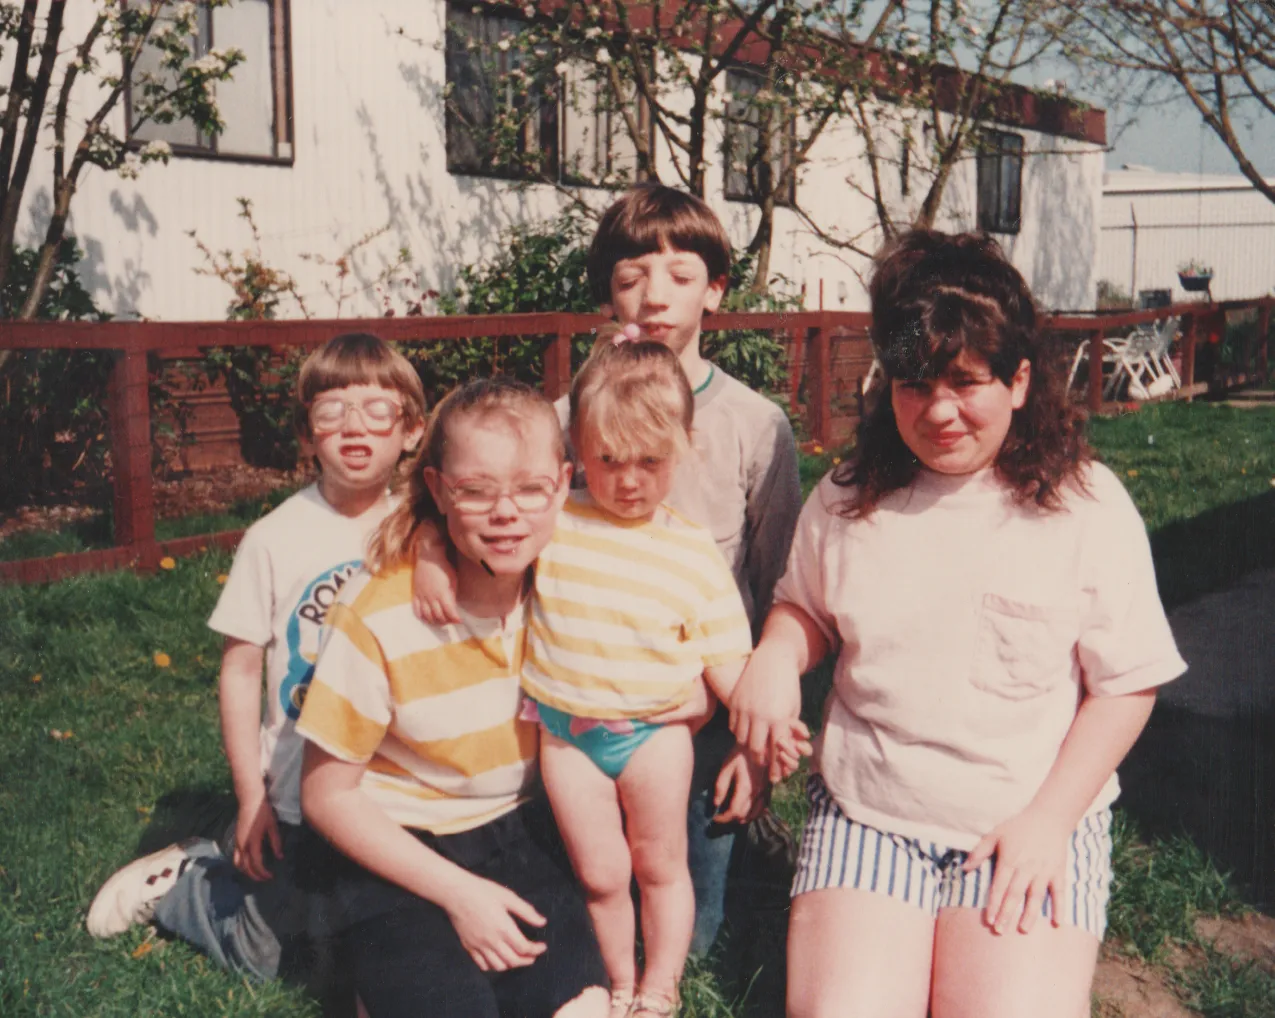 1992-03 Katie Joey Crystal Ricky Kathy Front Yard FG House.png